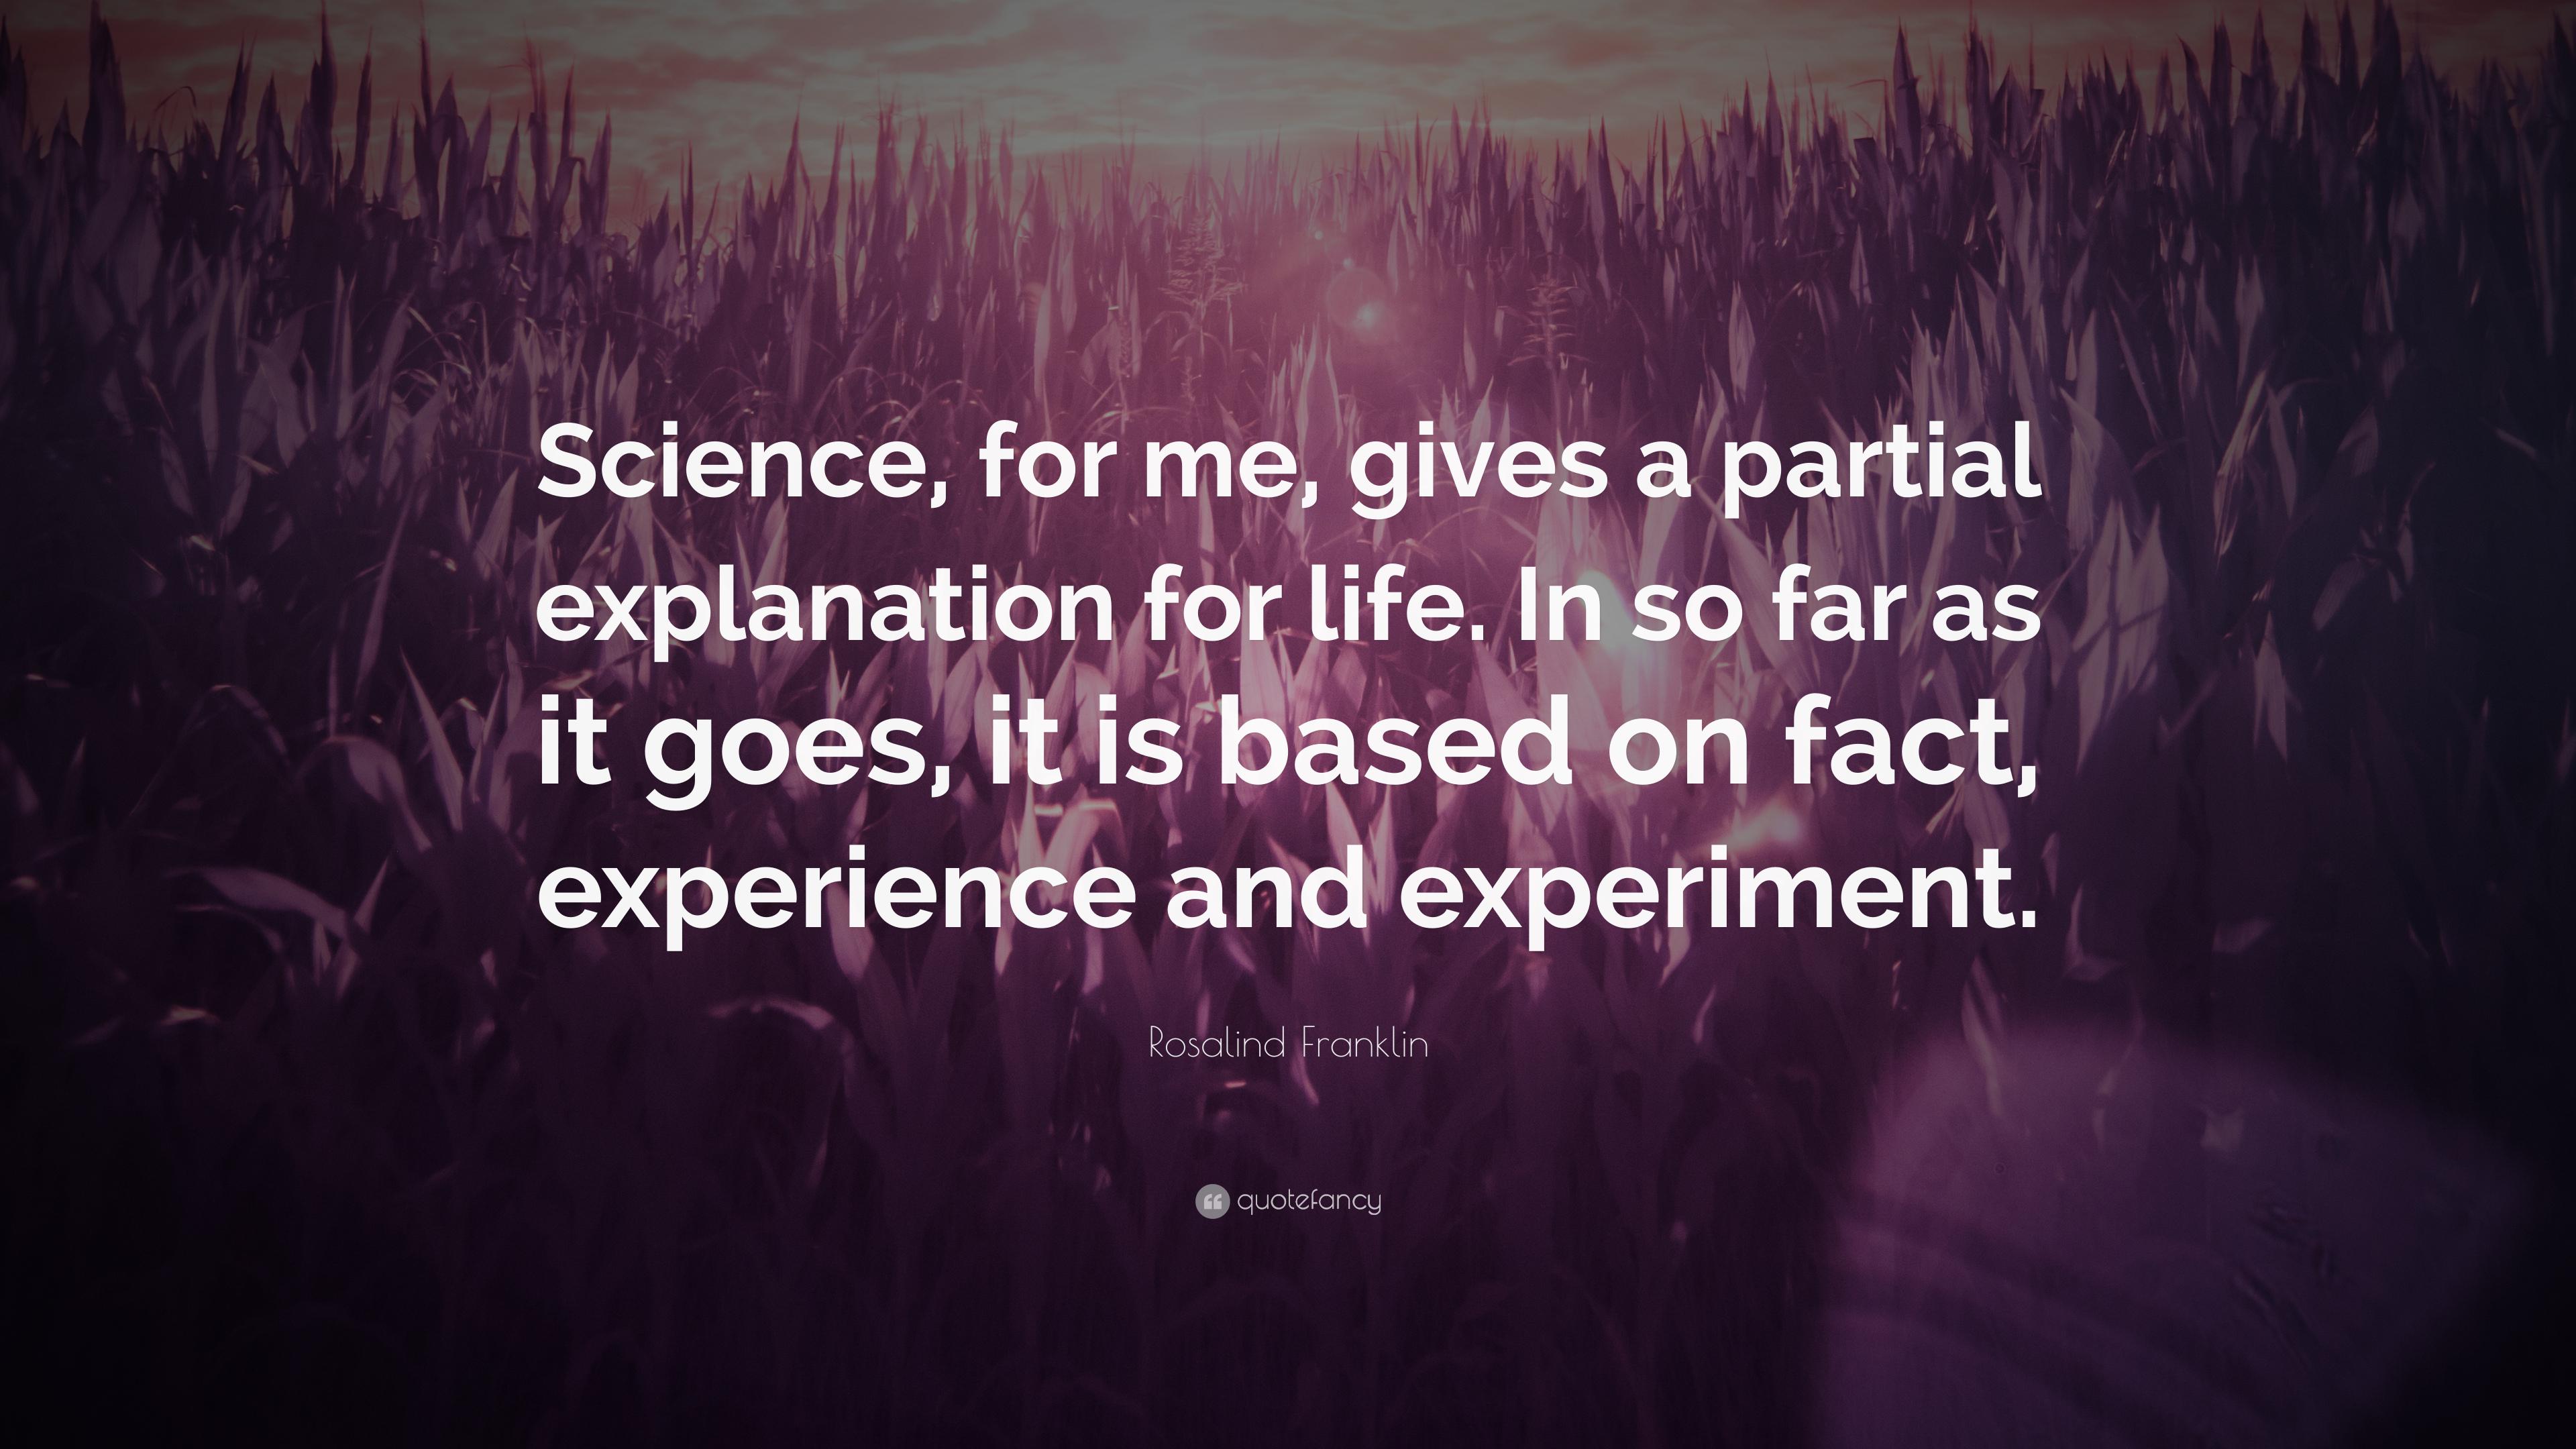 Rosalind Franklin Quote: “Science, for me, gives a partial